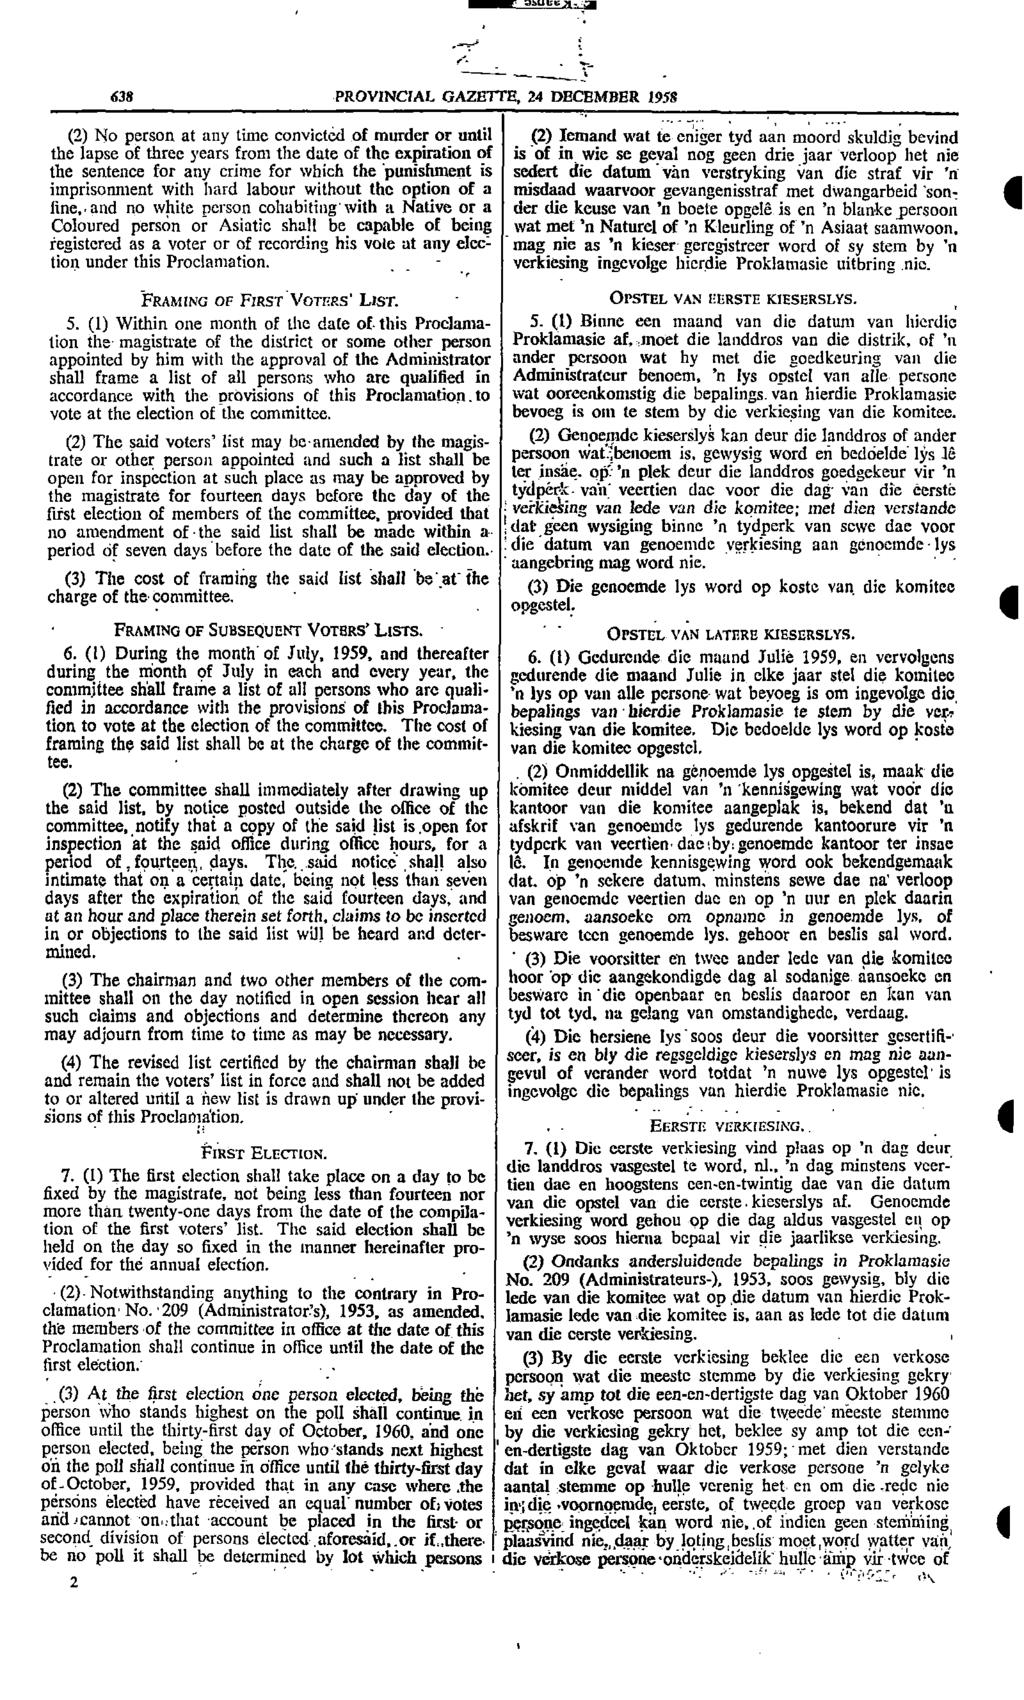 638 PROVNCAL GAZETTE 2 DECEMBER 1958 (2) No person at any time convicted of murder or until (2) emand wat te eniger tyd aan moord skuldig bevind the lapse of three years from the date of the